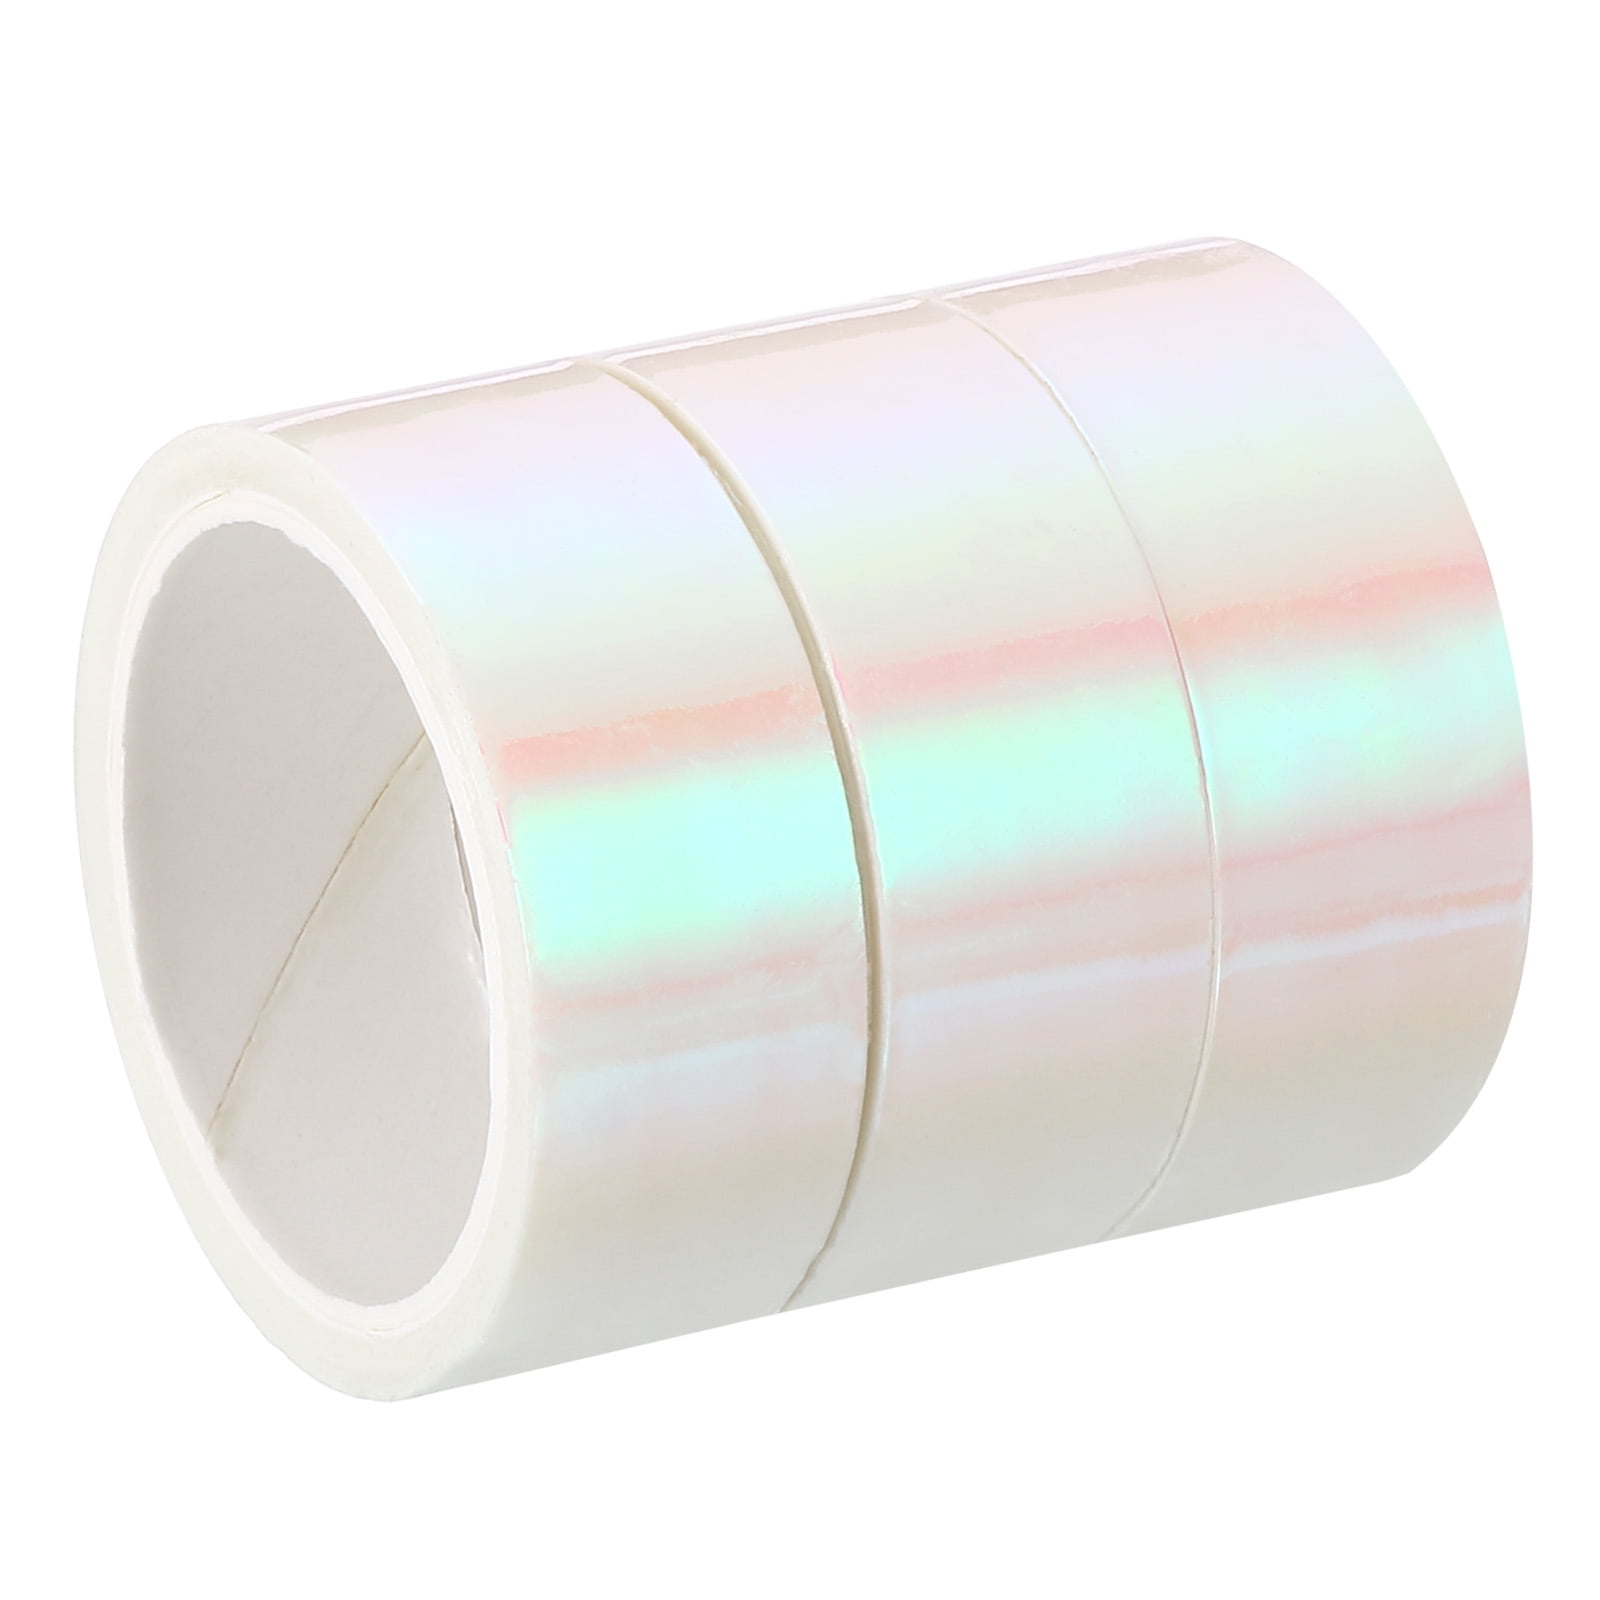 Uxcell 15mmx5m Holographic Tape Adhesive Metallic Foil Masking Sticker,  White 3 Roll